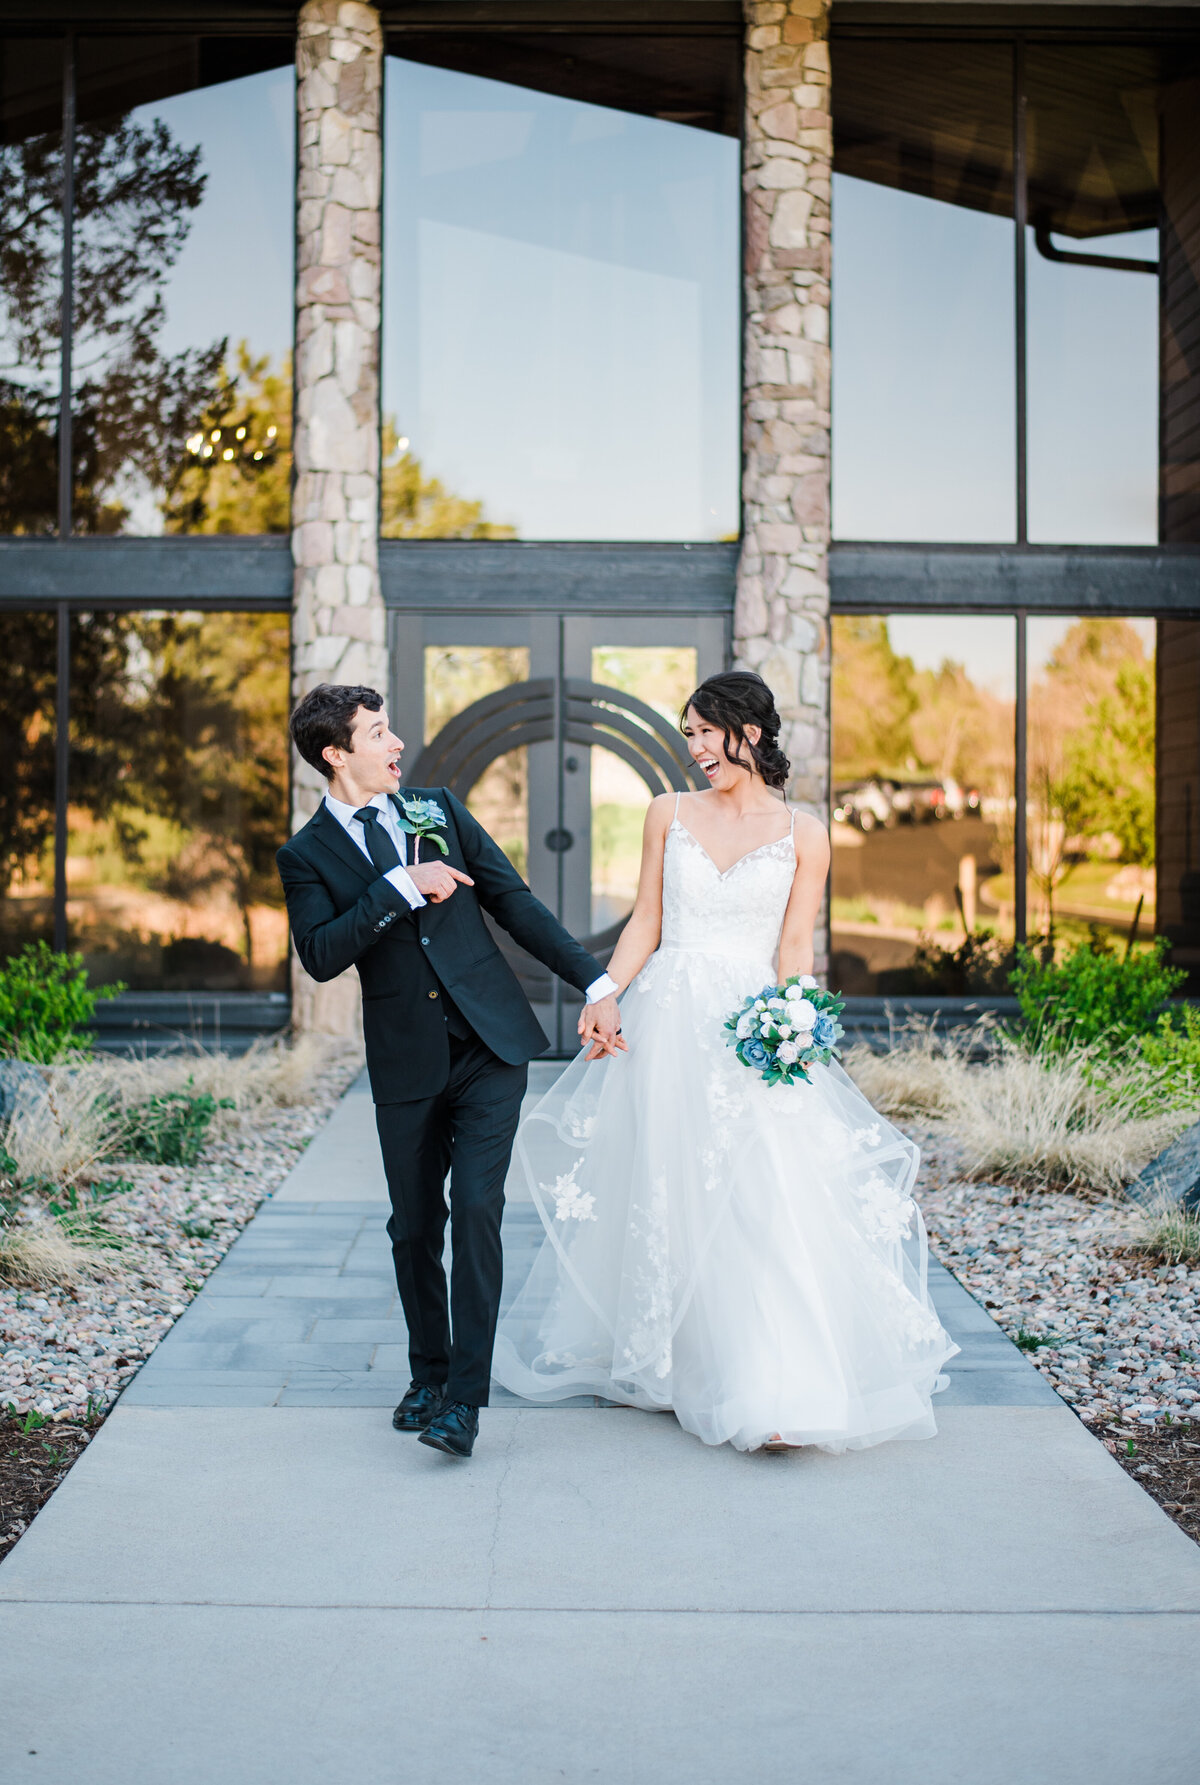 bride and groom holding hands and walking on a path at their denver wedding venue as the groom leans and points to his bride